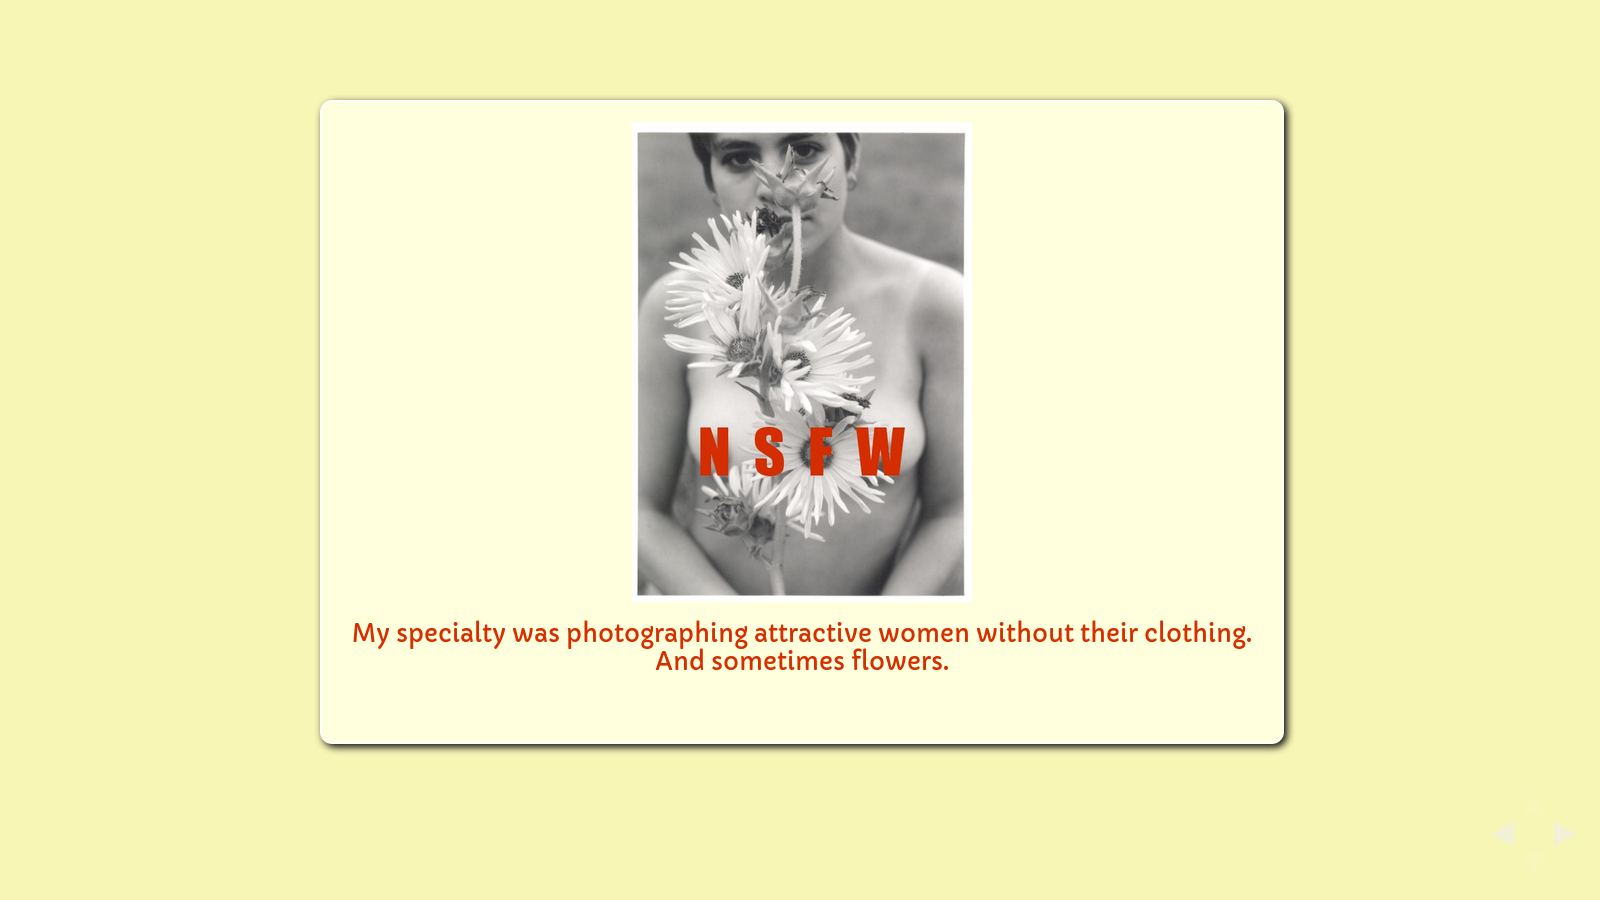 Slide: early11_large.jpg. "My specialty was photographing attractive women without their clothing. And sometimes flowers."